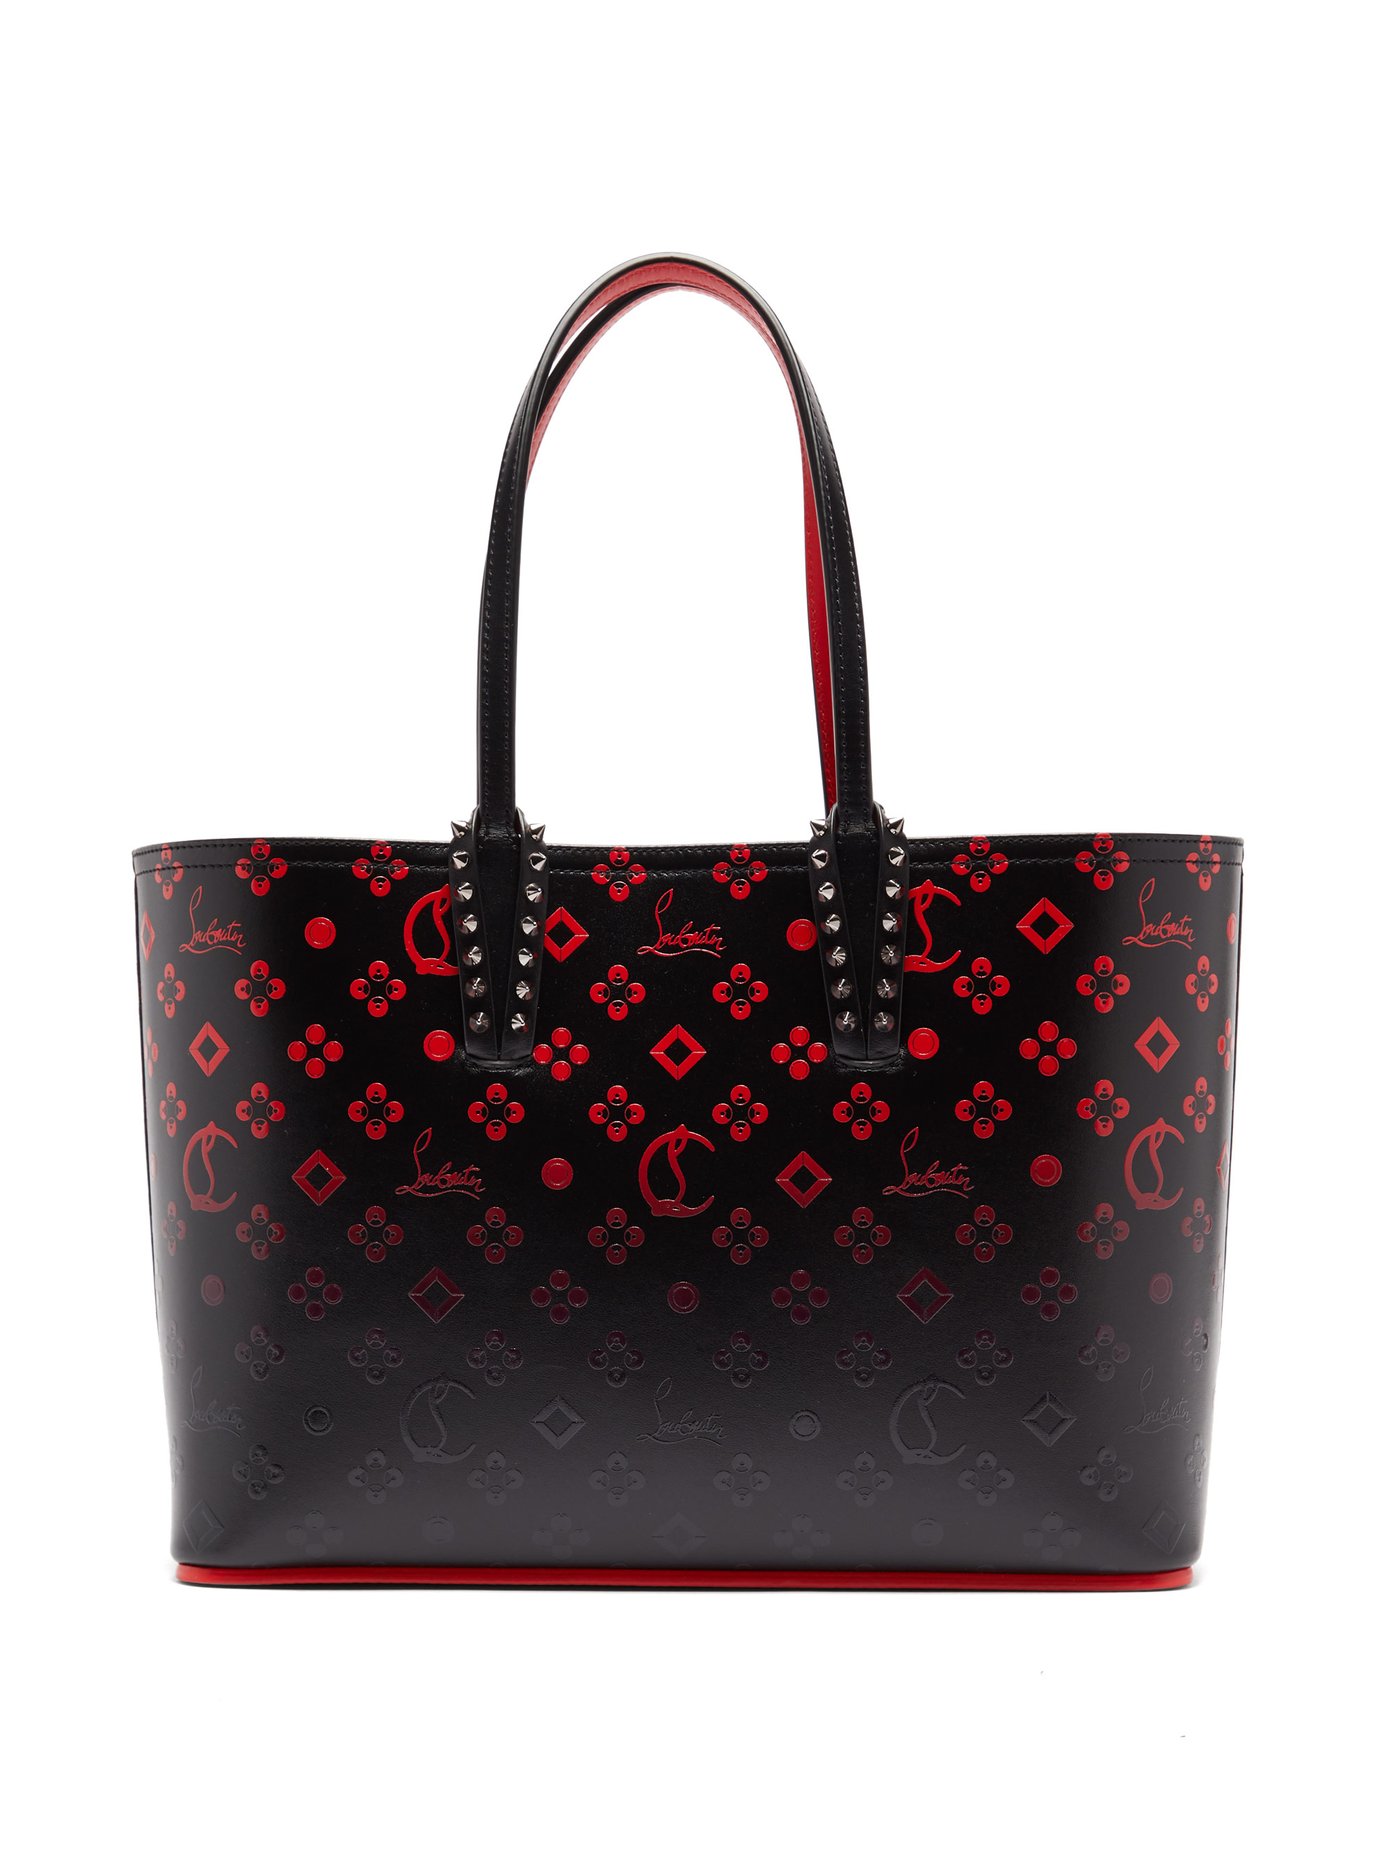 Christian Louboutin Cabata Loubinthesky Red Sole Tote Bag In Black ...